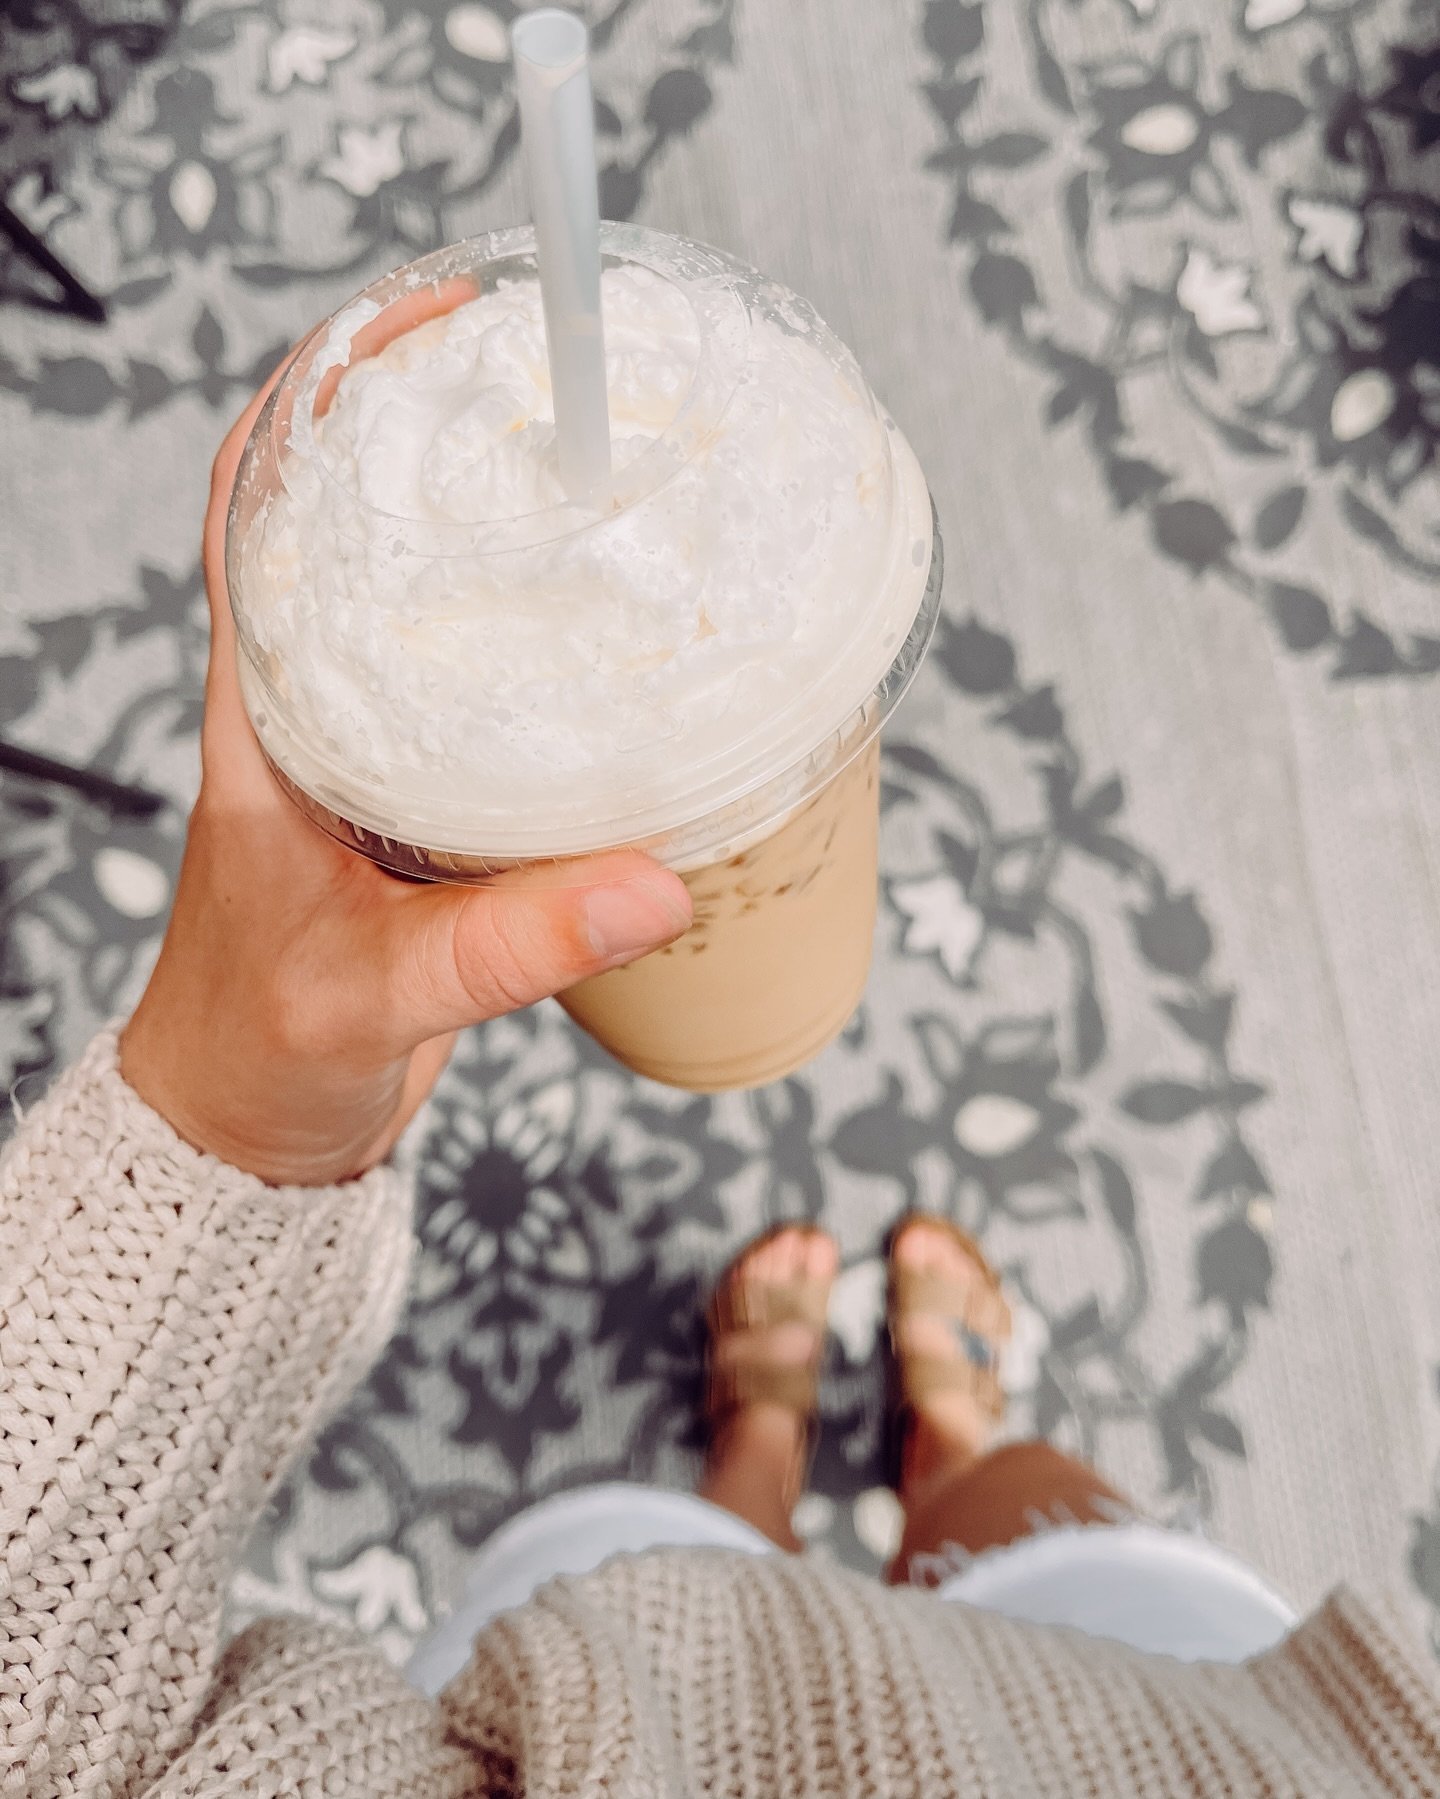 Yesterday was a shorts wearing, iced latte sipping, and sunbathing type of day. Today&hellip; is definitely a sweatshirt and hot latte kind of day! ☁️

Whether you&rsquo;re sipping on an iced or hot drink we hope that have the best cozy cloudy day! 
